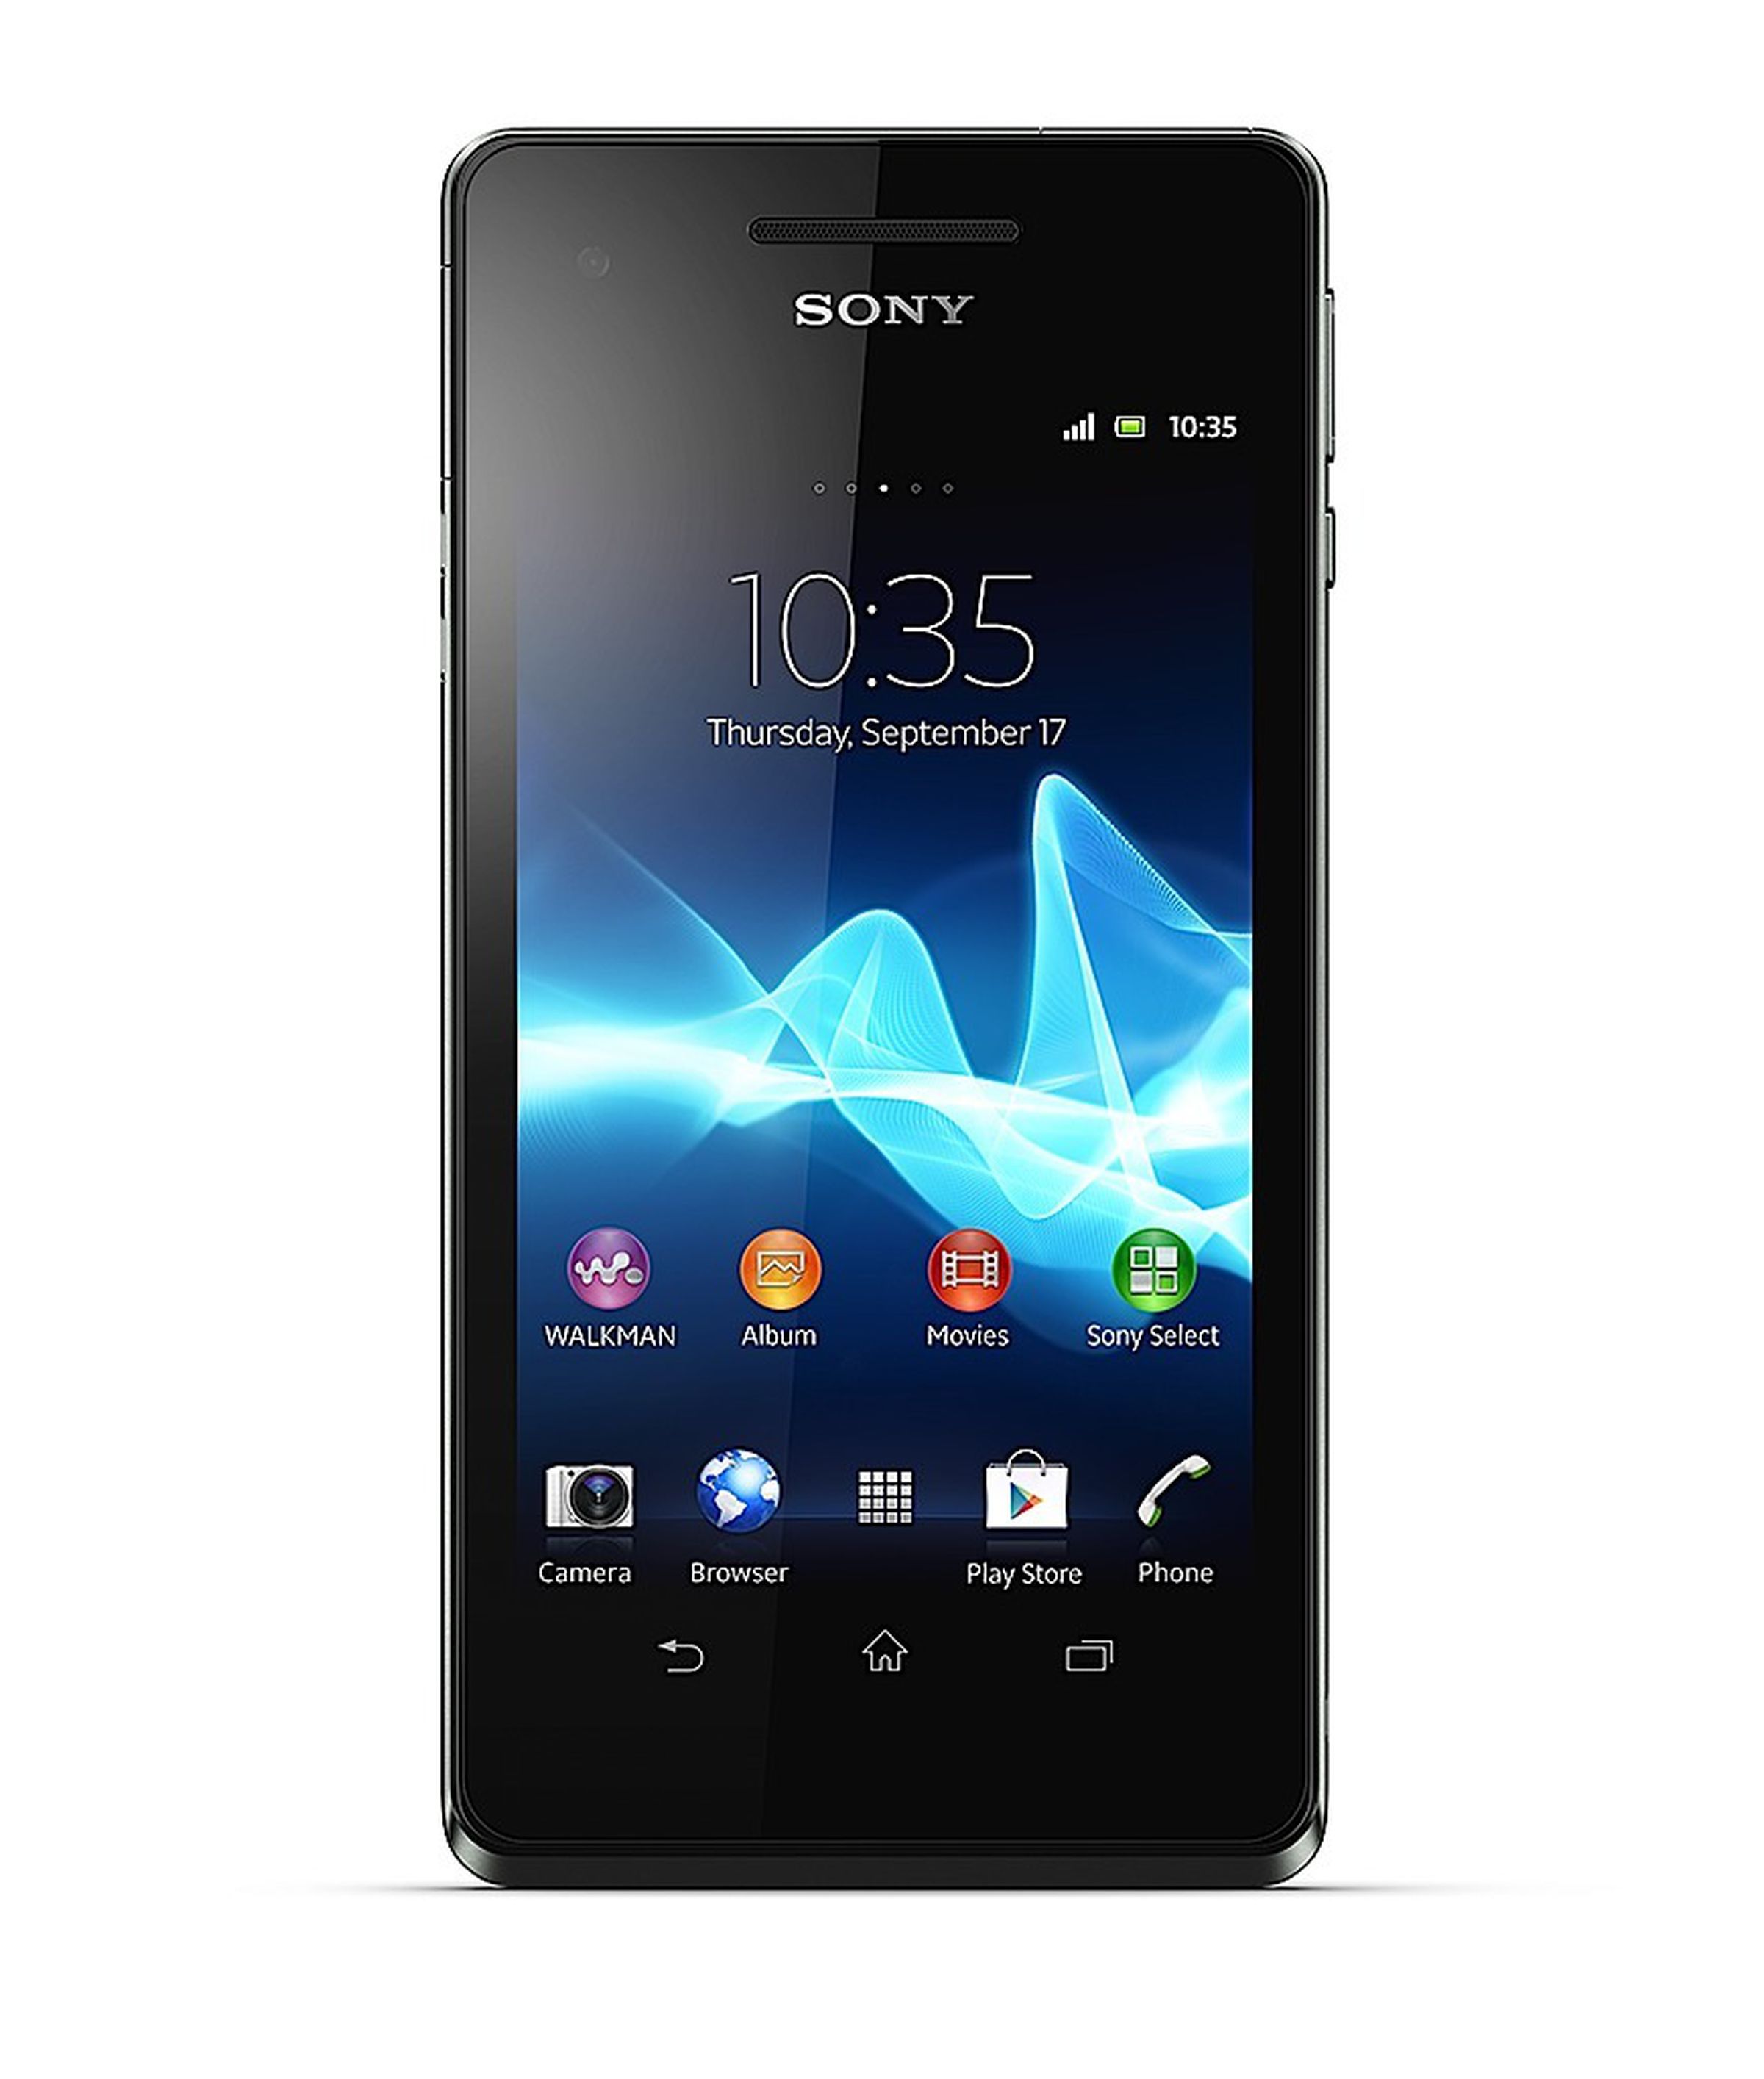 Sony Xperia T, V, and J smartphones